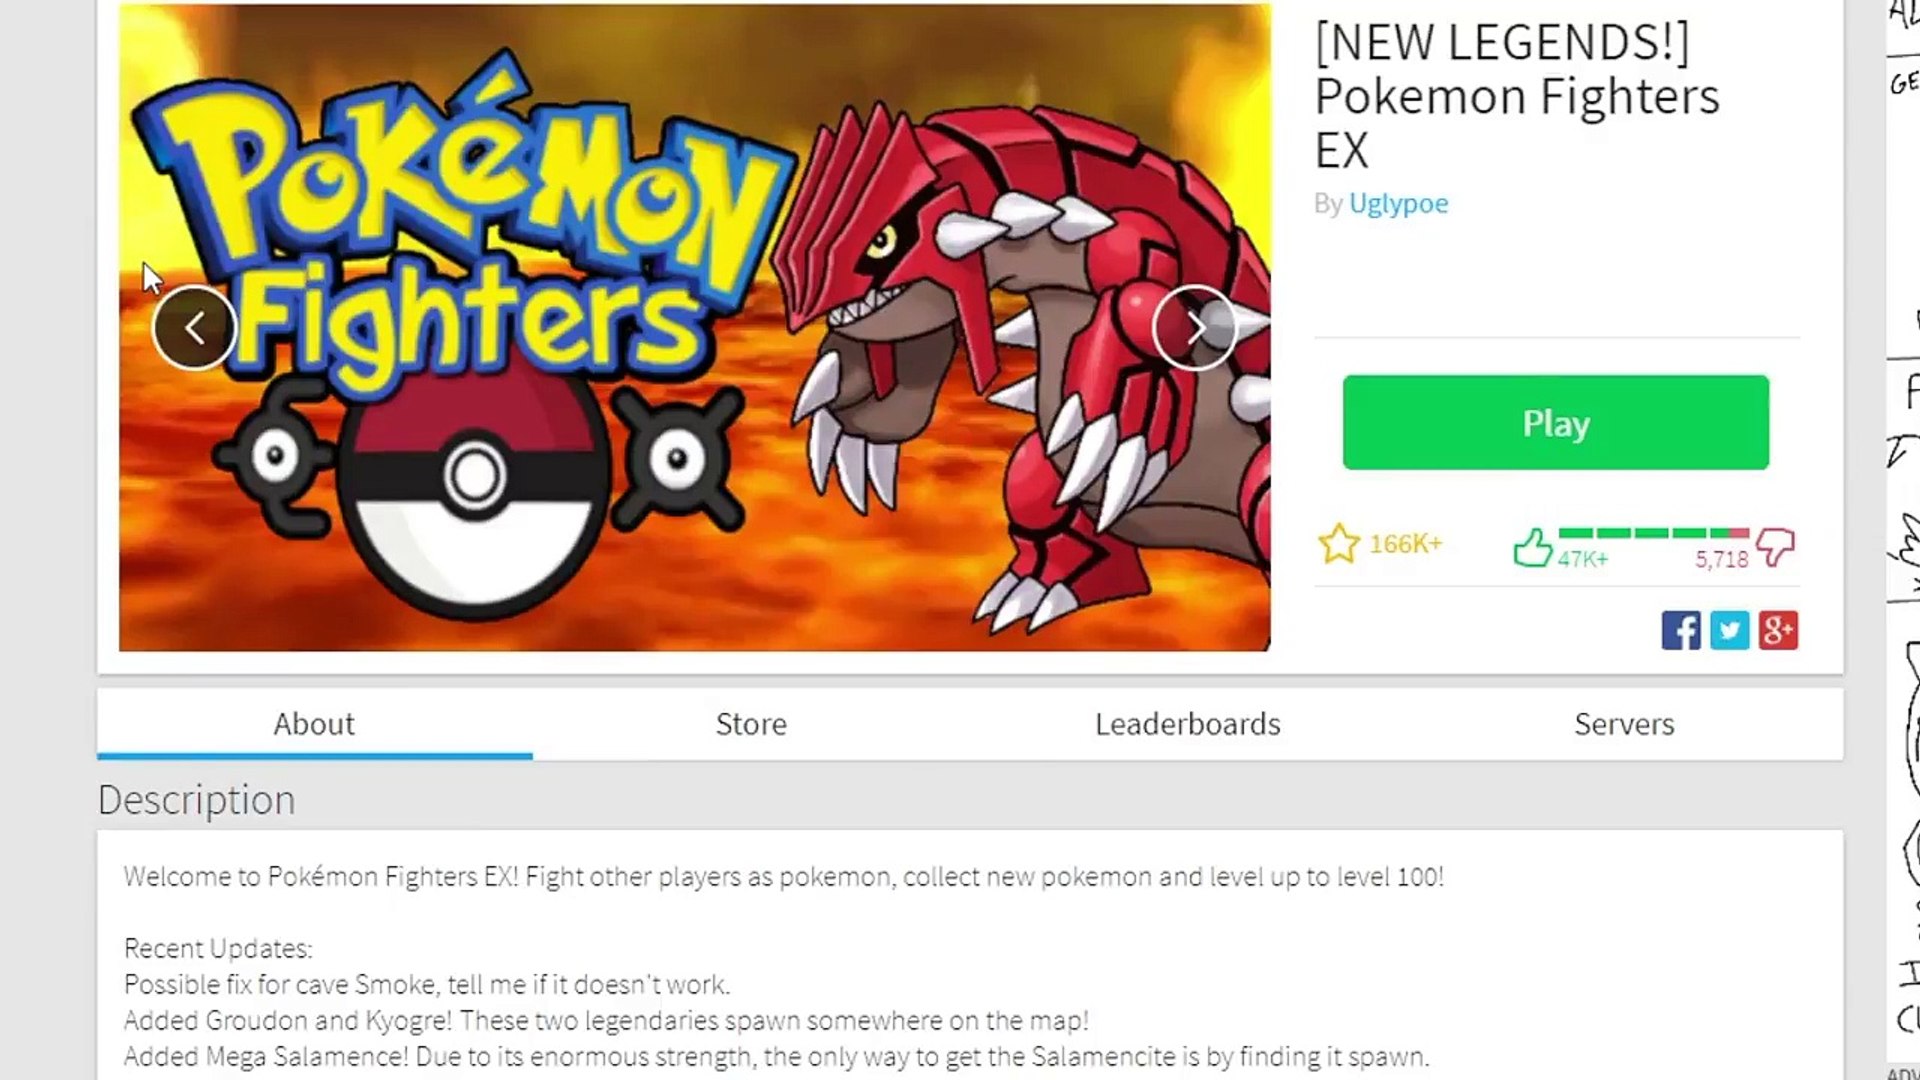 I Caught Kyogre Pokemon Fighters Ex Roblox Video Dailymotion - roblox pokemon fighters ex spawn legendaries